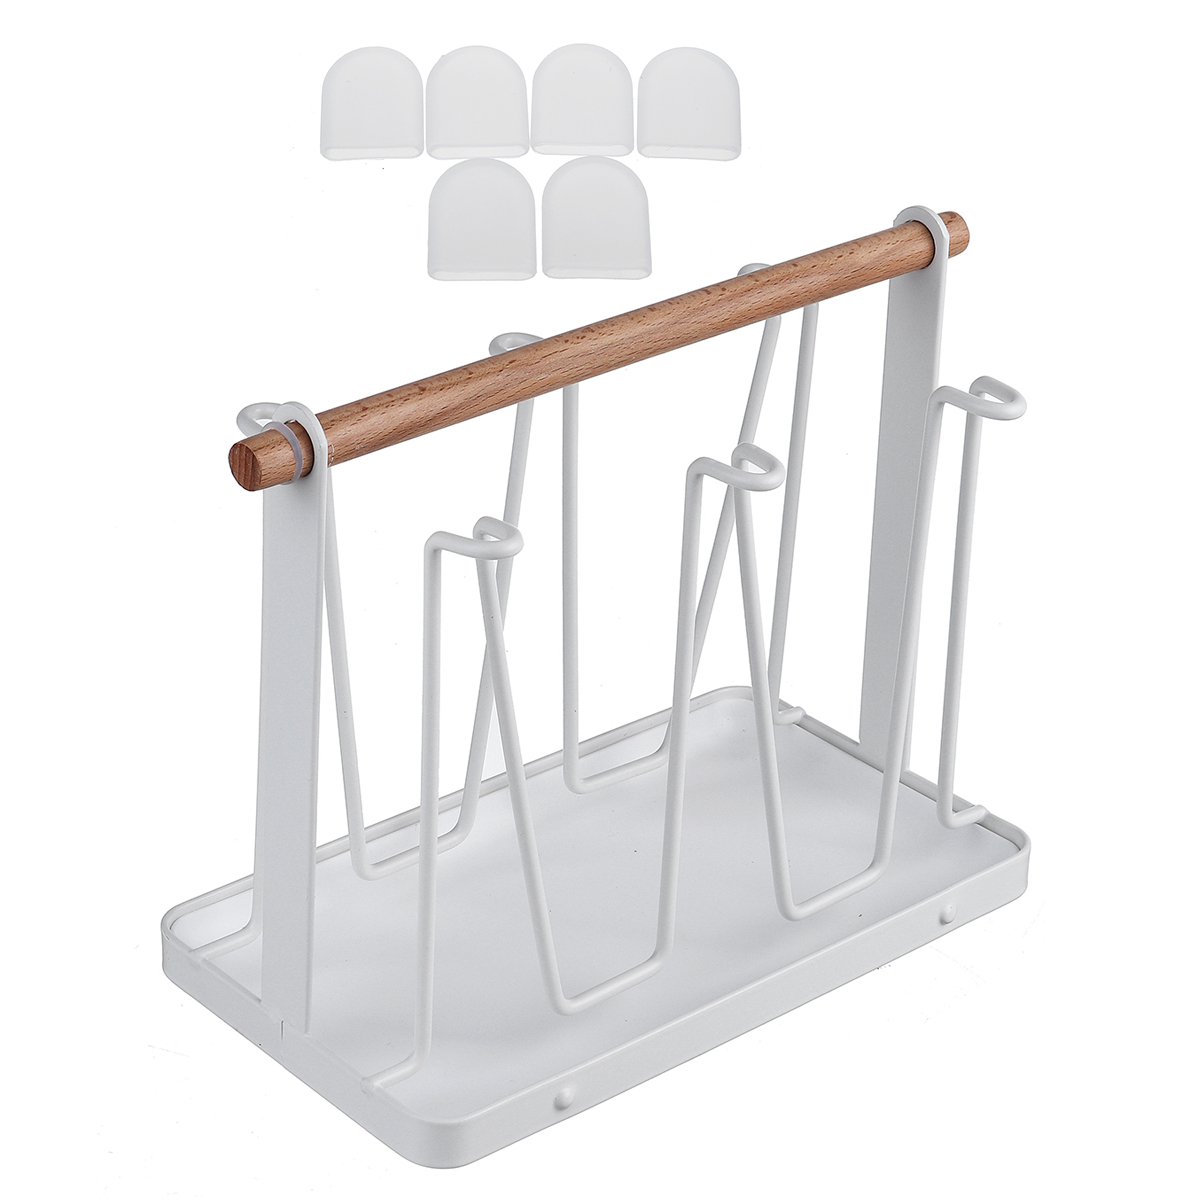 Wrought-Iron-Upside-Down-Drain-Japanese-Style-Cup-Holder-Water-Cup-Mug-Storage-Rack-Drain-Rack-1722859-8